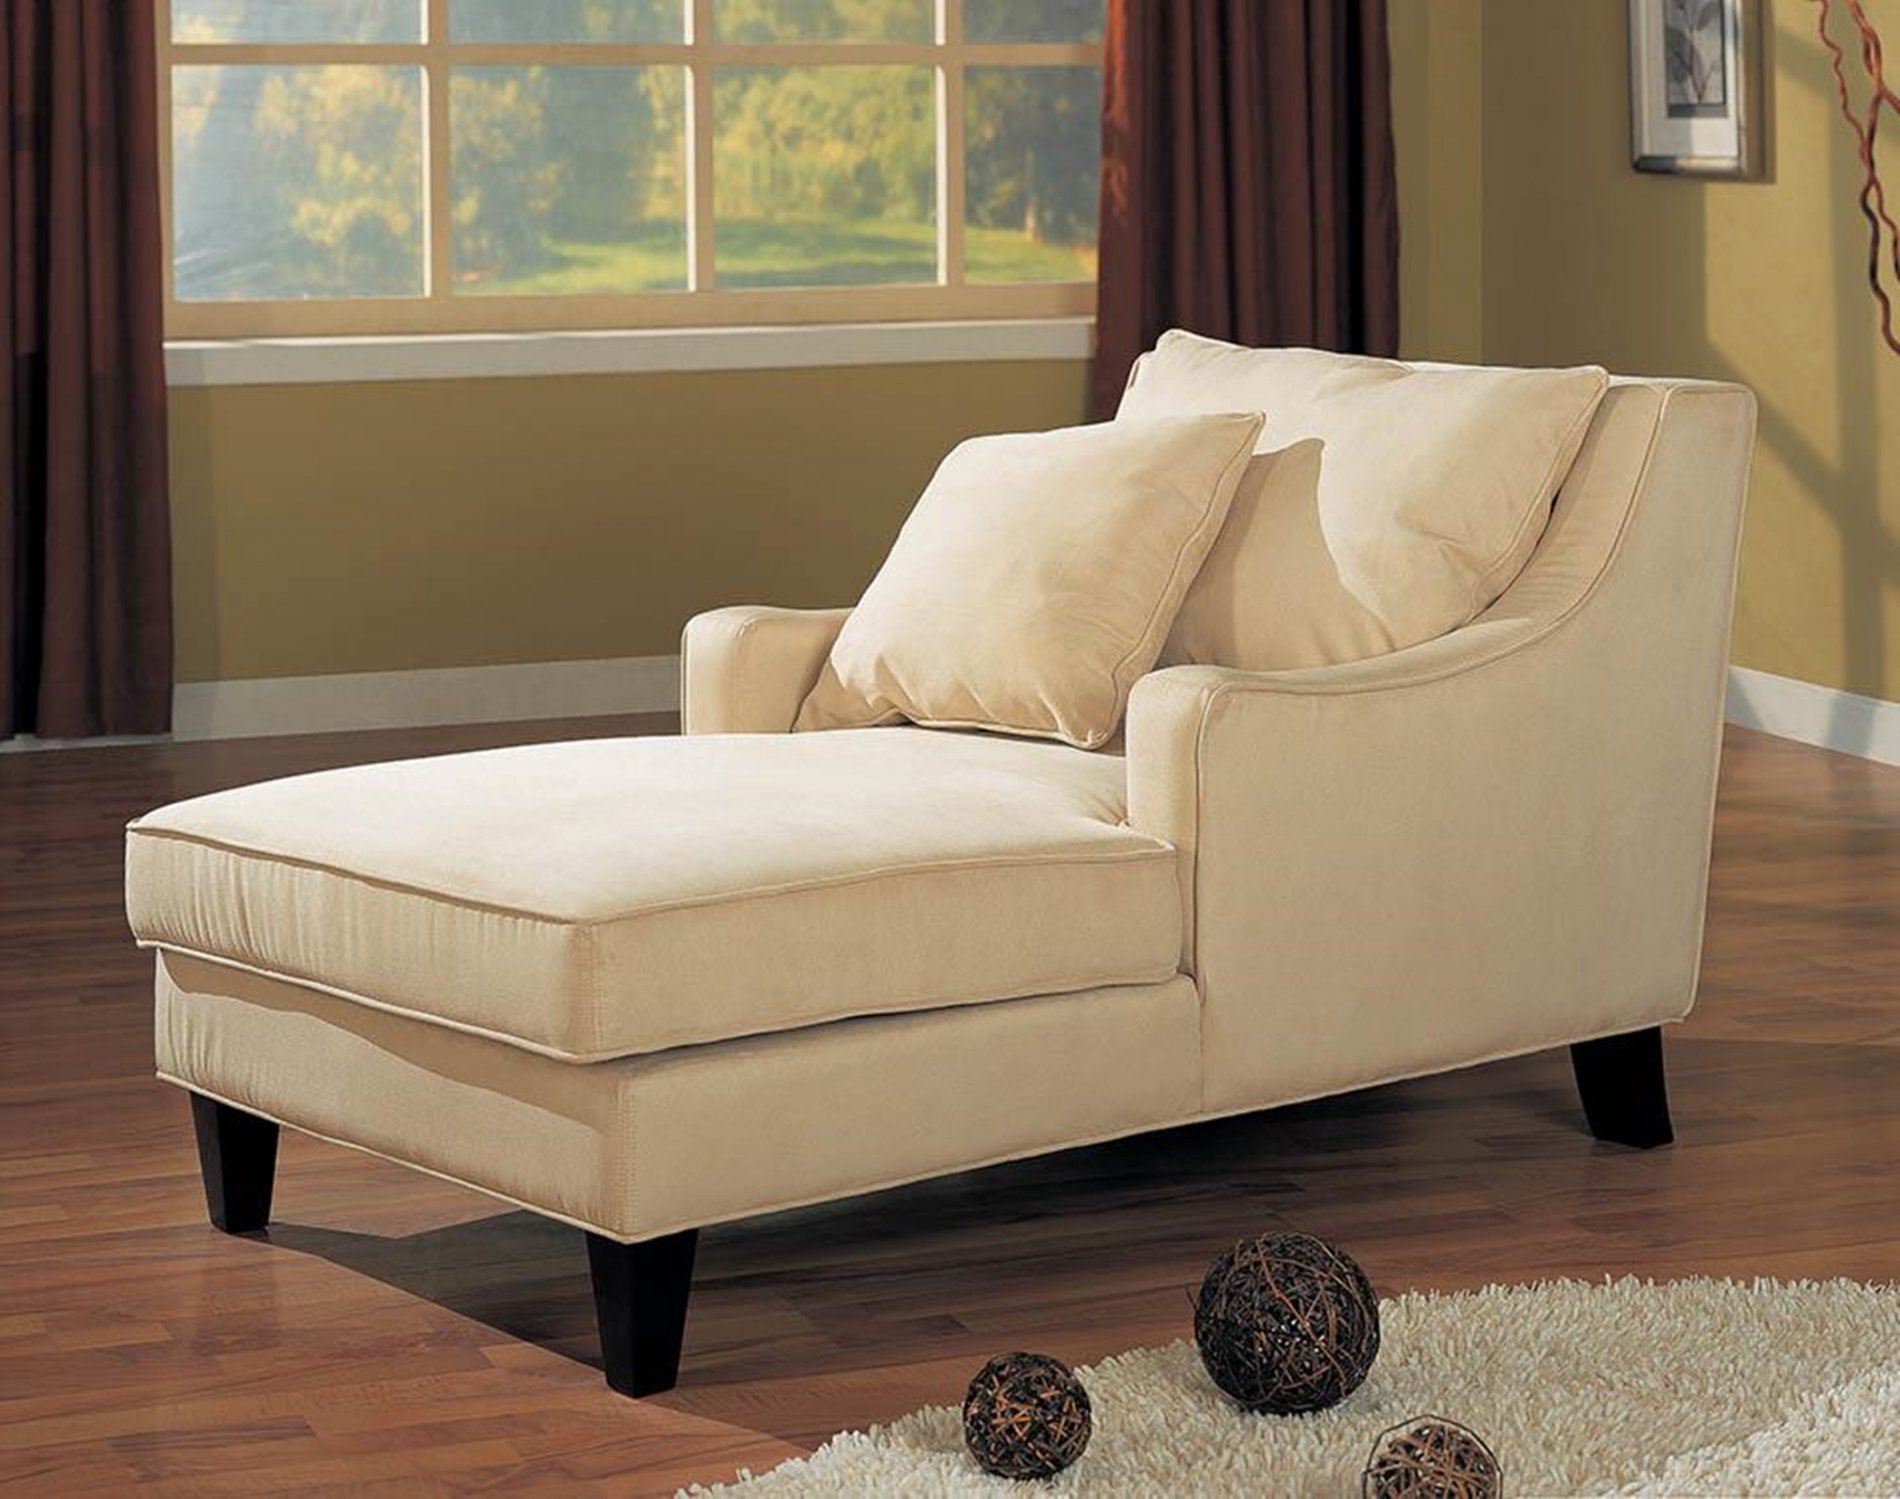 Beige Chaise Lounger - Click Image to Close